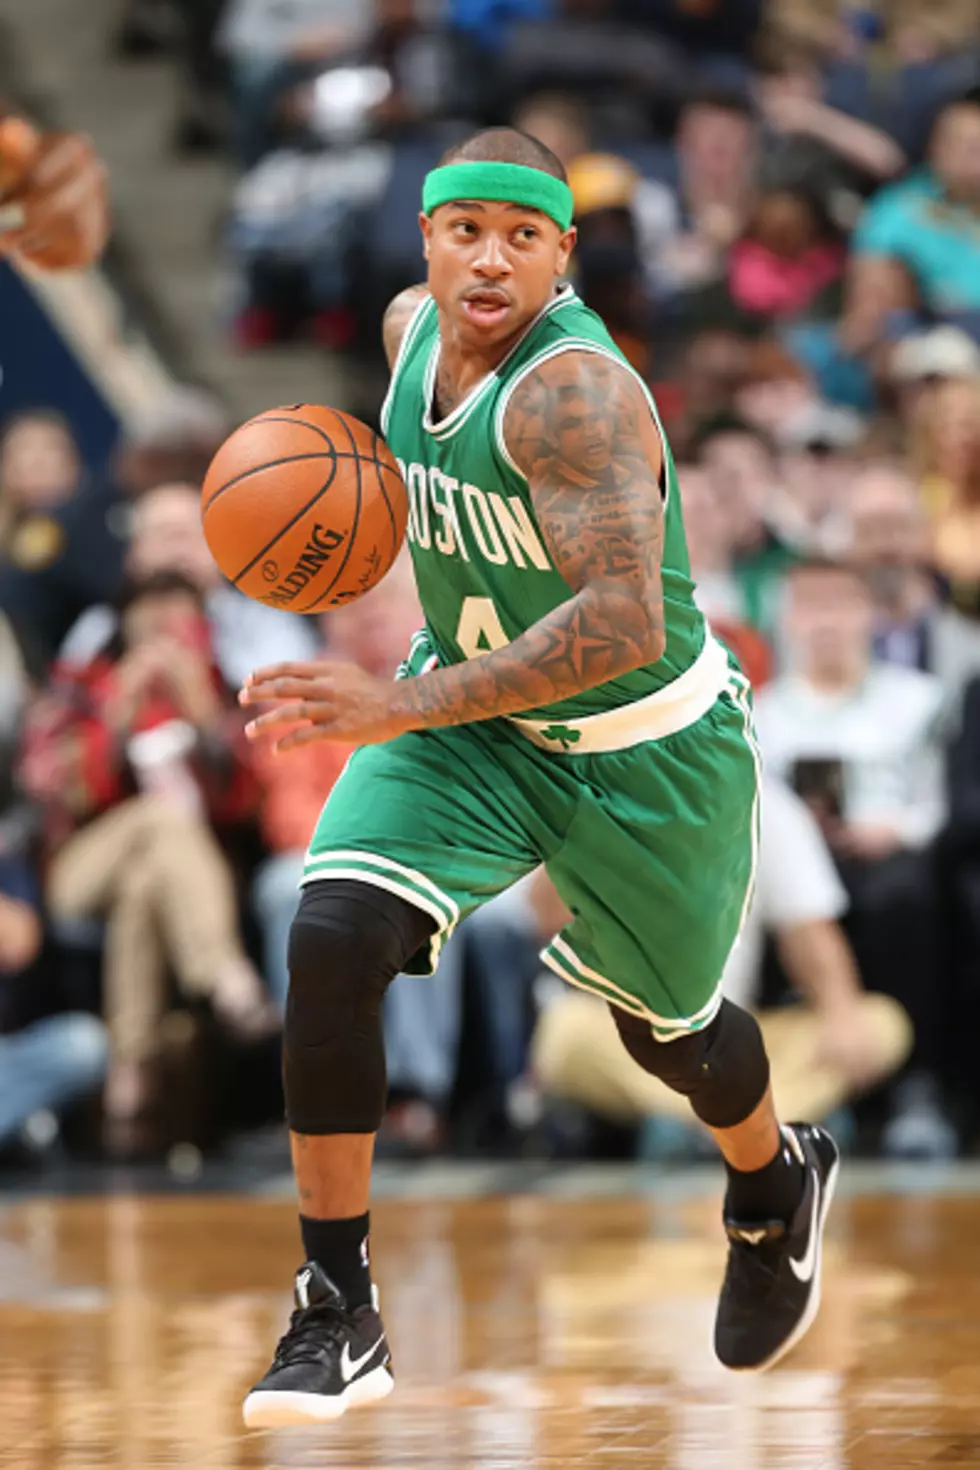 Thomas Gets Career High 44 In C&#8217;s Win [VIDEO]